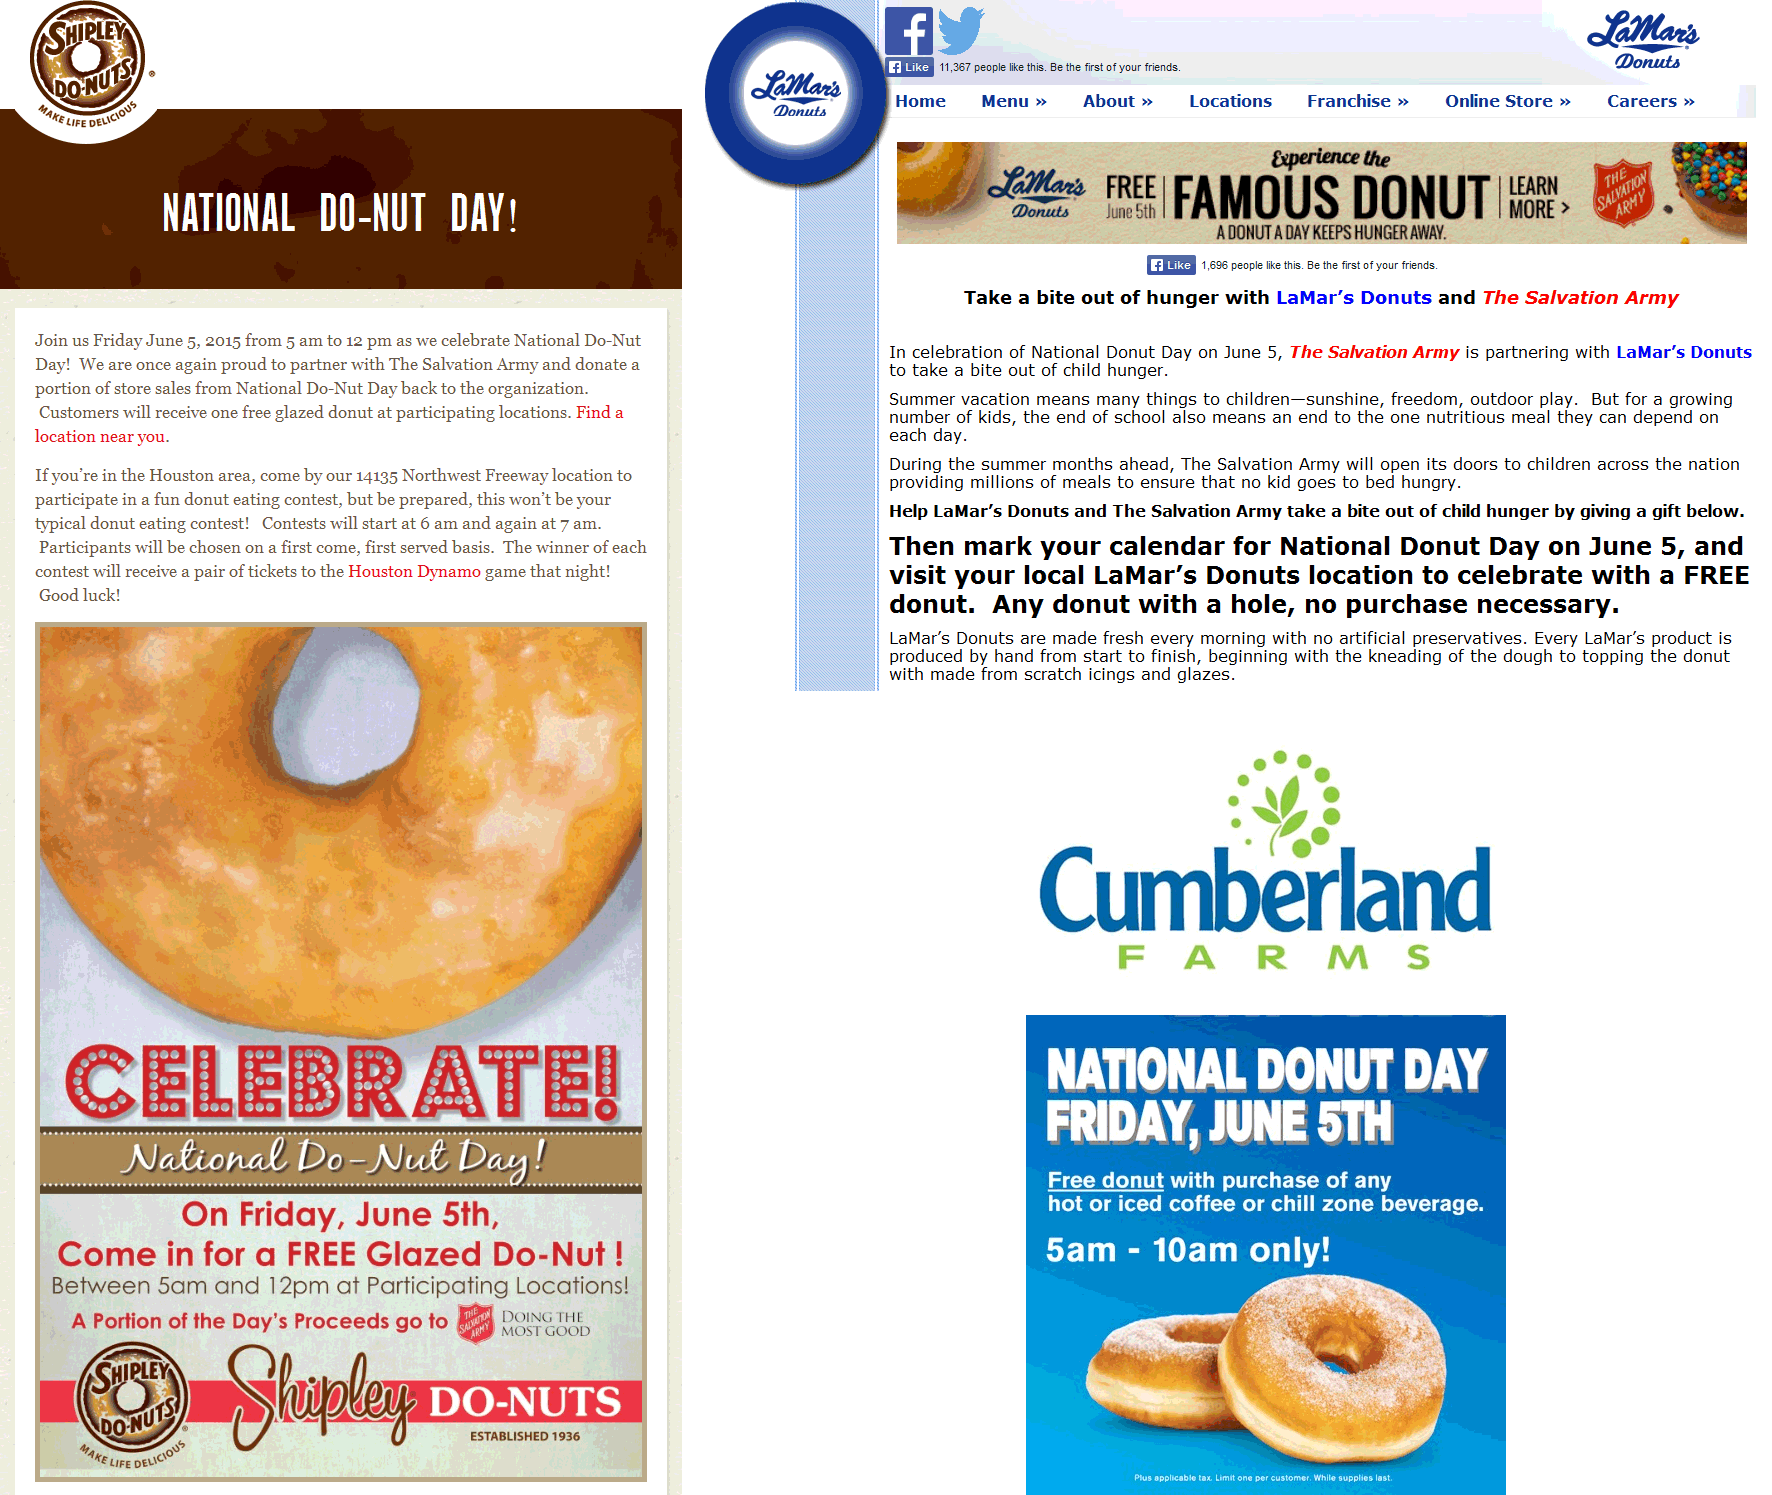 Shipley Do-Nuts Coupon March 2024 More free donuts today at Shipley Do-Nuts, LaMars Donuts & Cumberland Farms